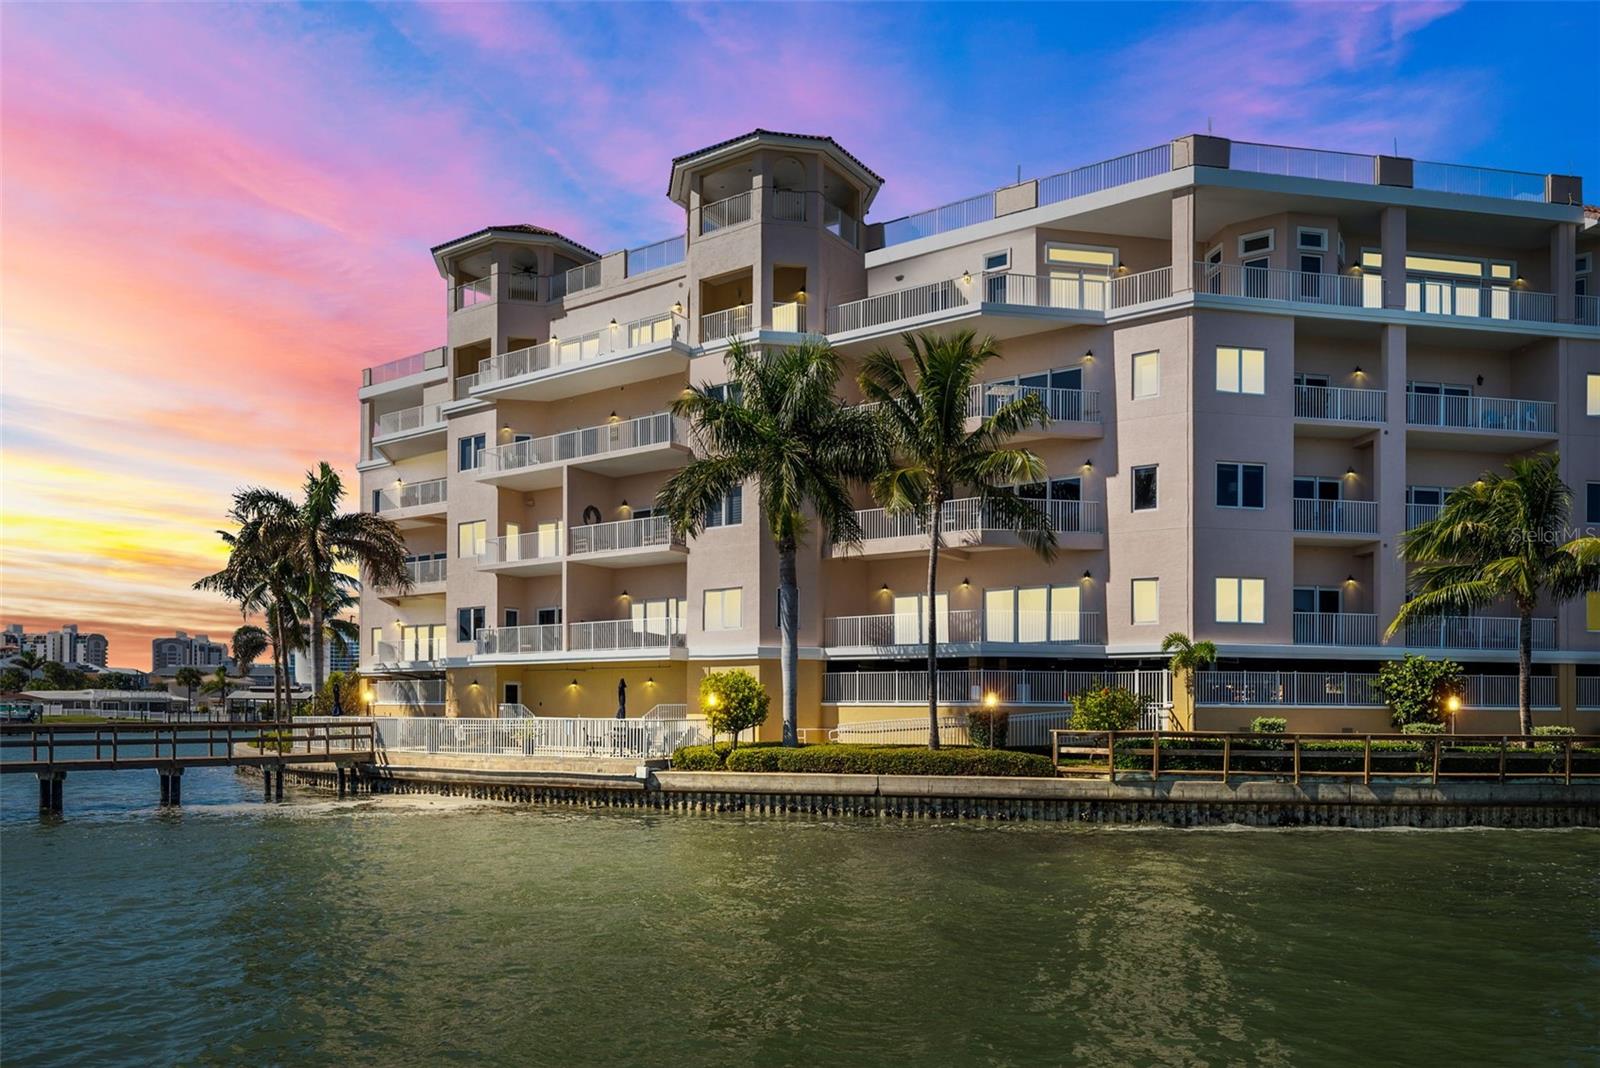 For sale: 205 BRIGHTWATER DRIVE # 402, CLEARWATER FL 33767, CLEARWATER, FL